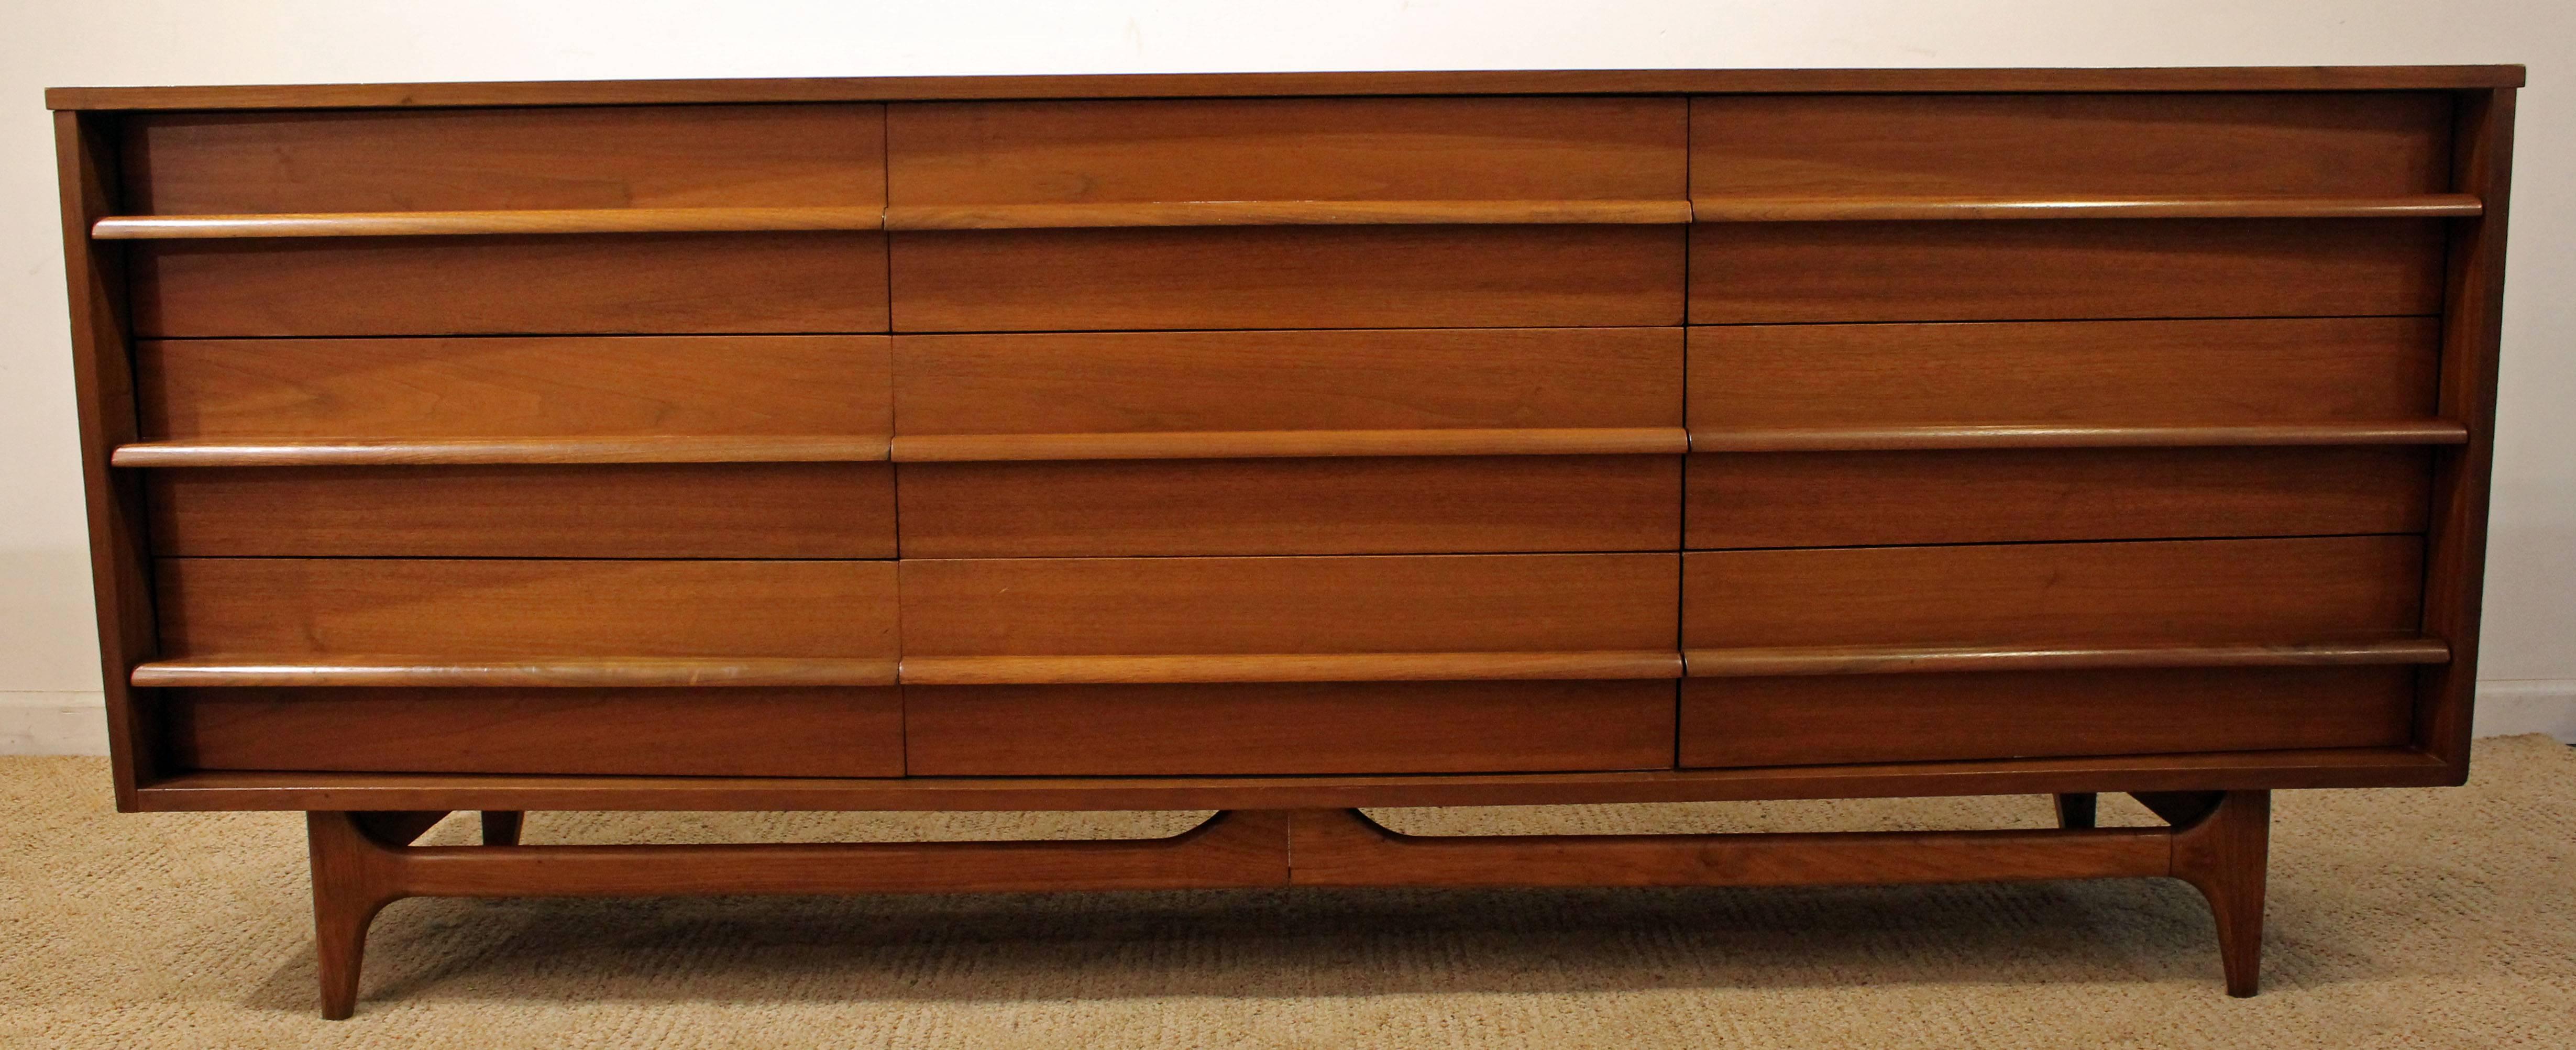 This piece is made of walnut, featuring a curved front and nine dovetailed drawers with sculpted pulls. In excellent condition, has been refinished. It is marked by YMC (Young Manufacturing Co). 

Dimensions: 
80